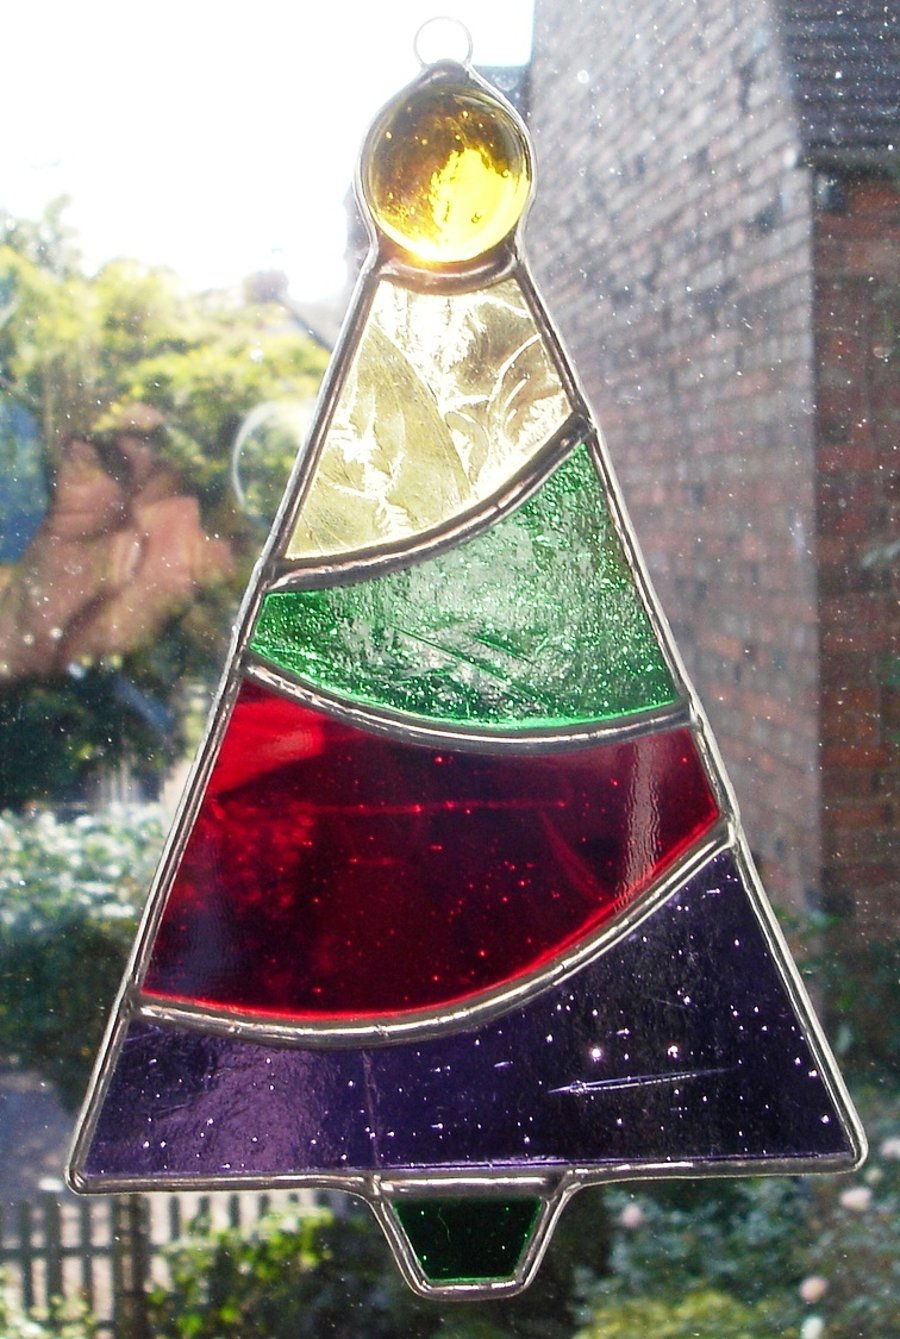 CHRISTMAS TREE IN STAINED GLASS